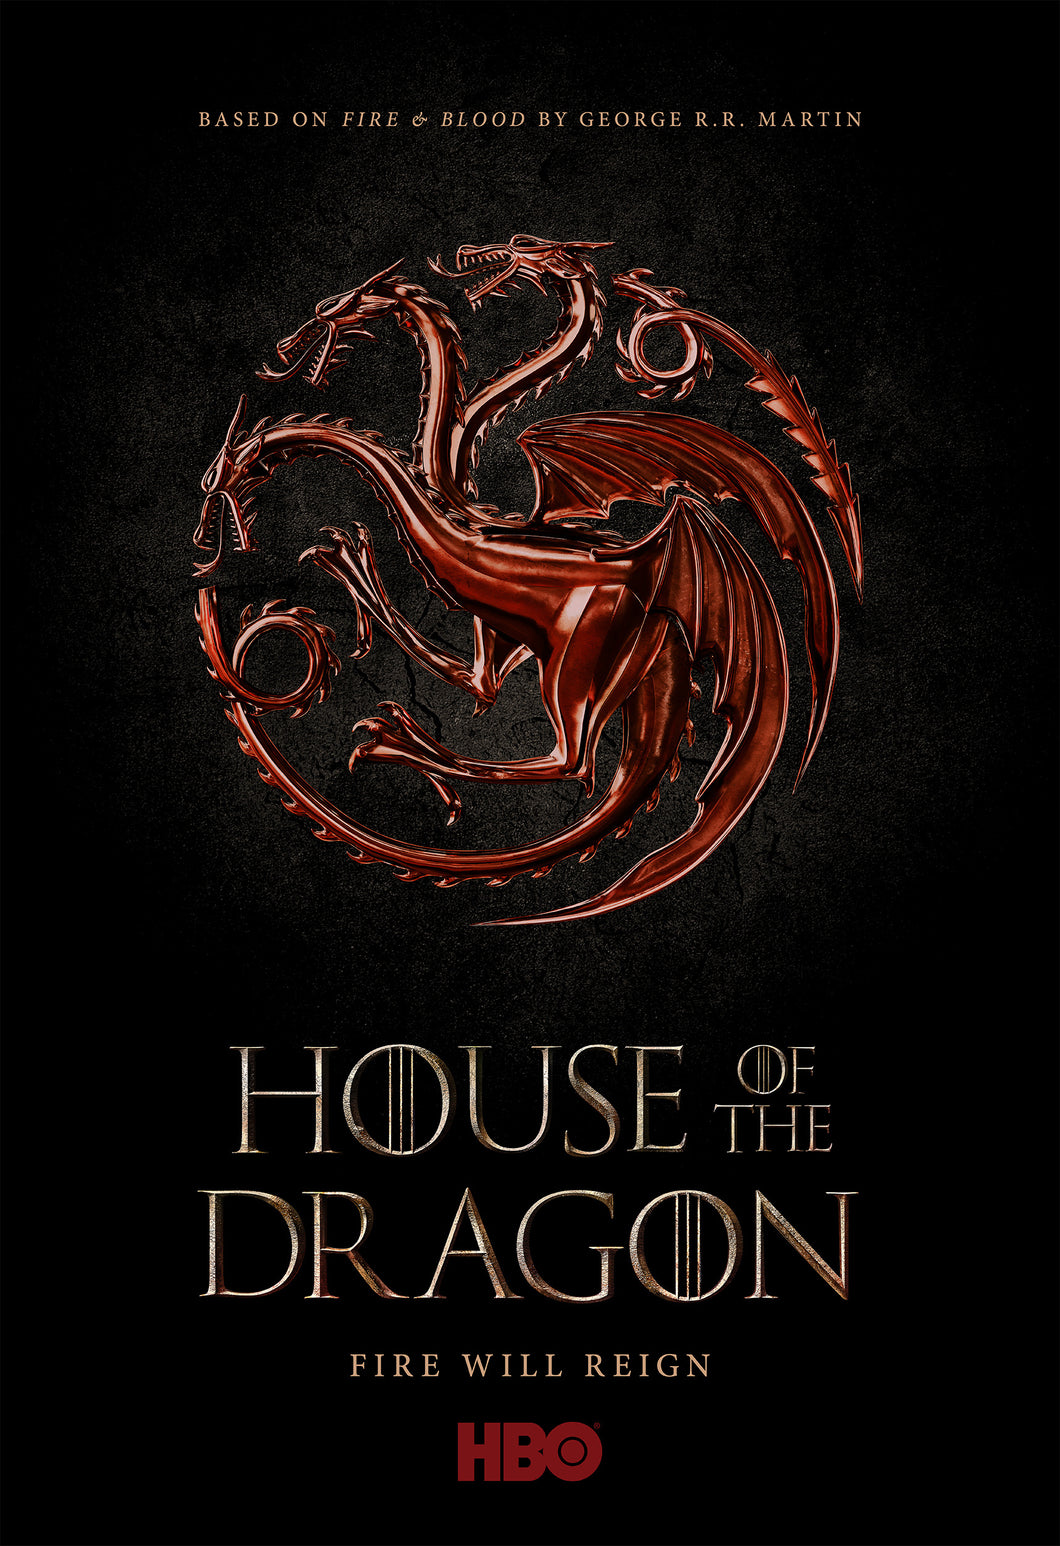 Poster Serie House of the Dragon (tv)